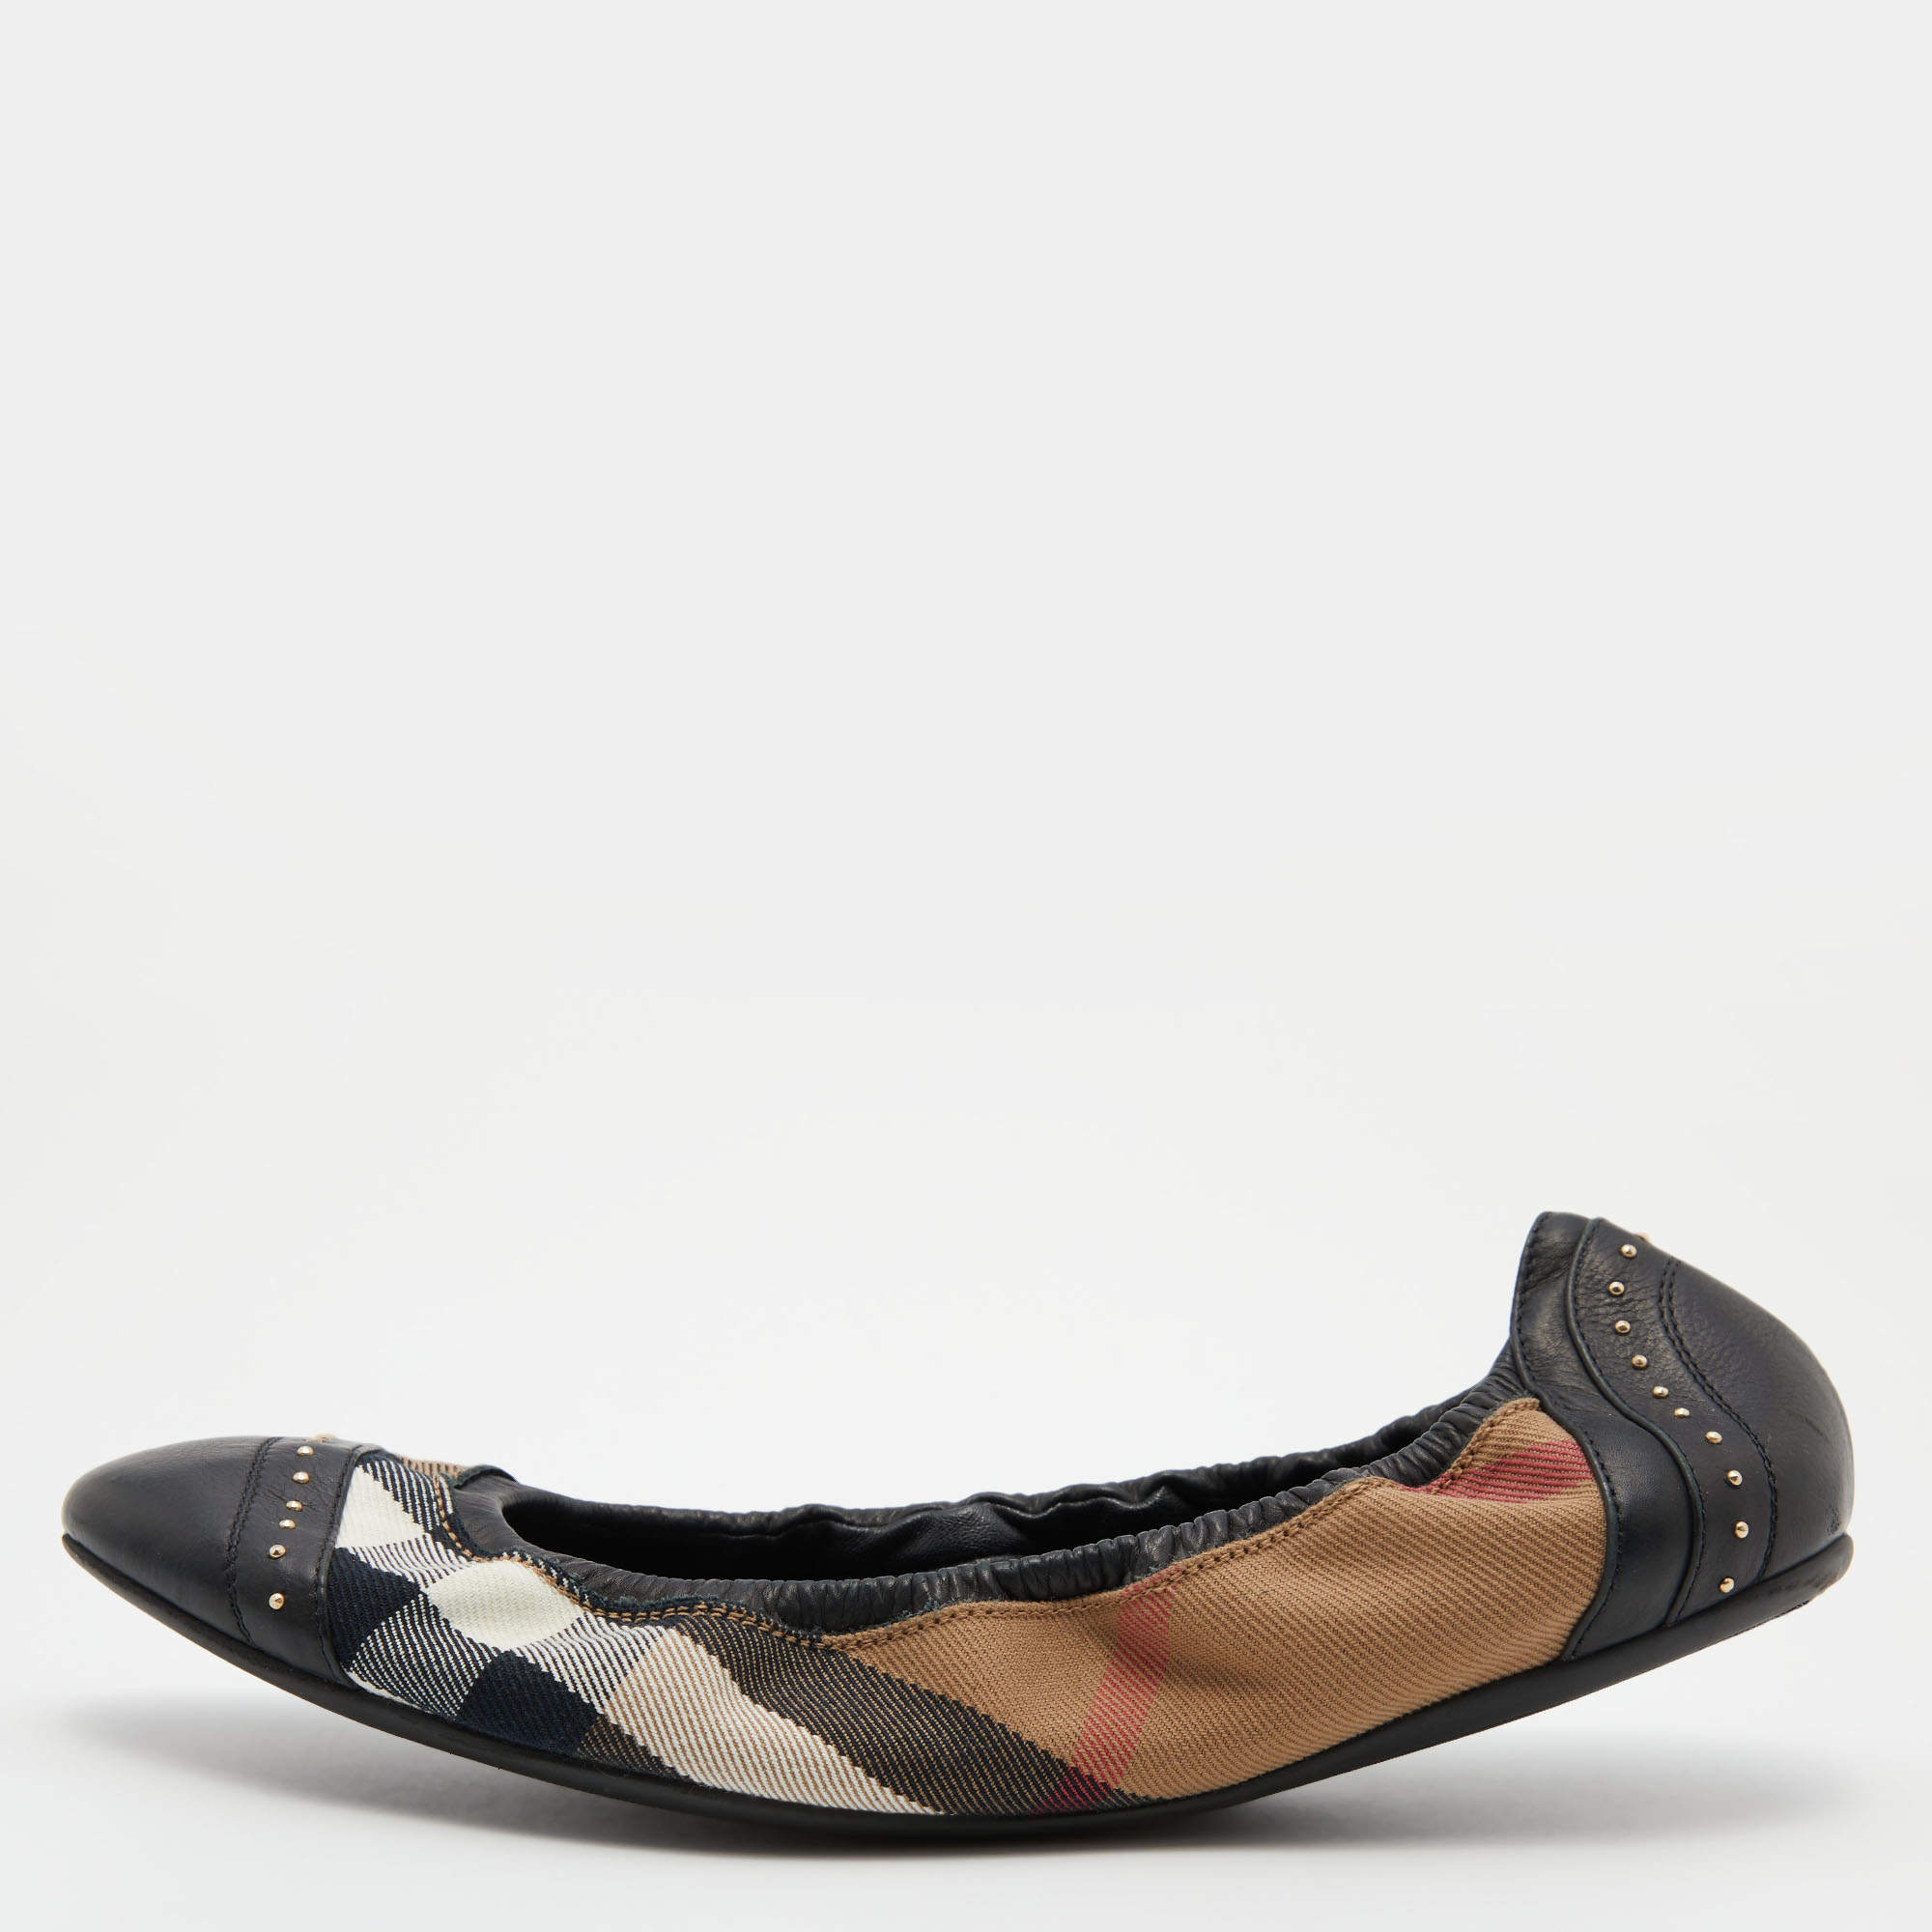 Timeless Chic: Burberry Ladies Flat Shoes